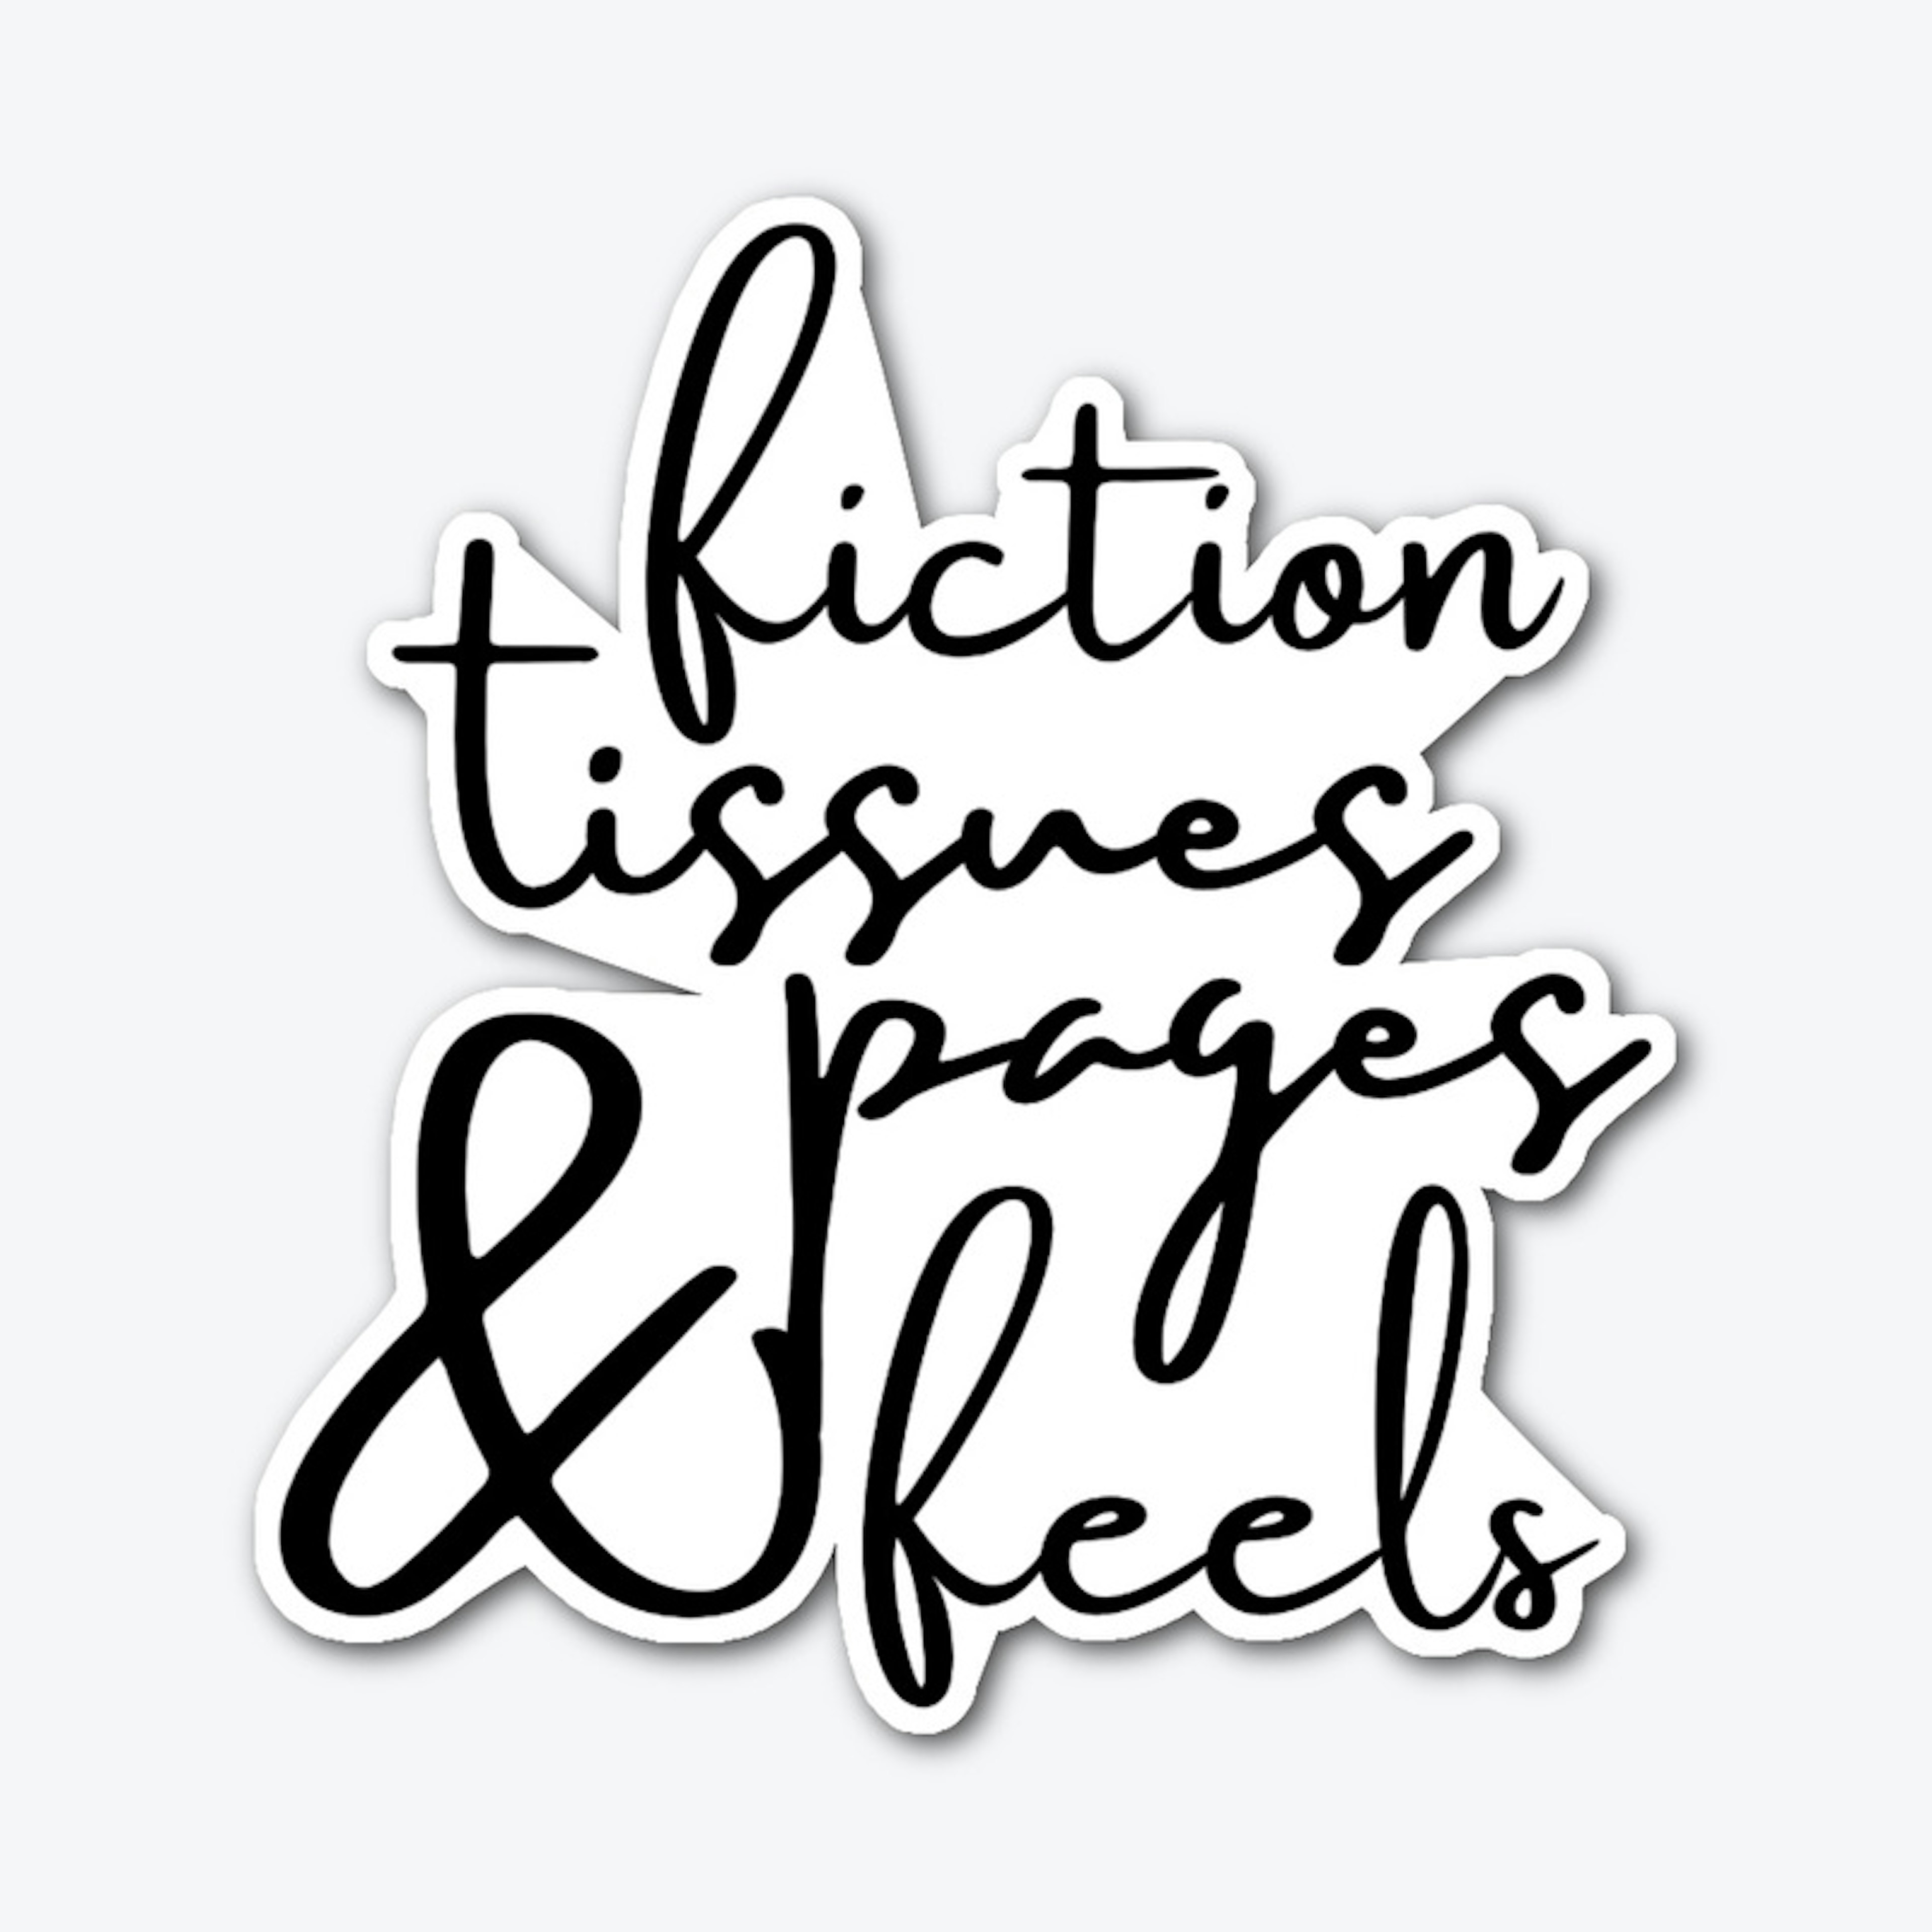 Fiction, Tissues, Pages, & Feels